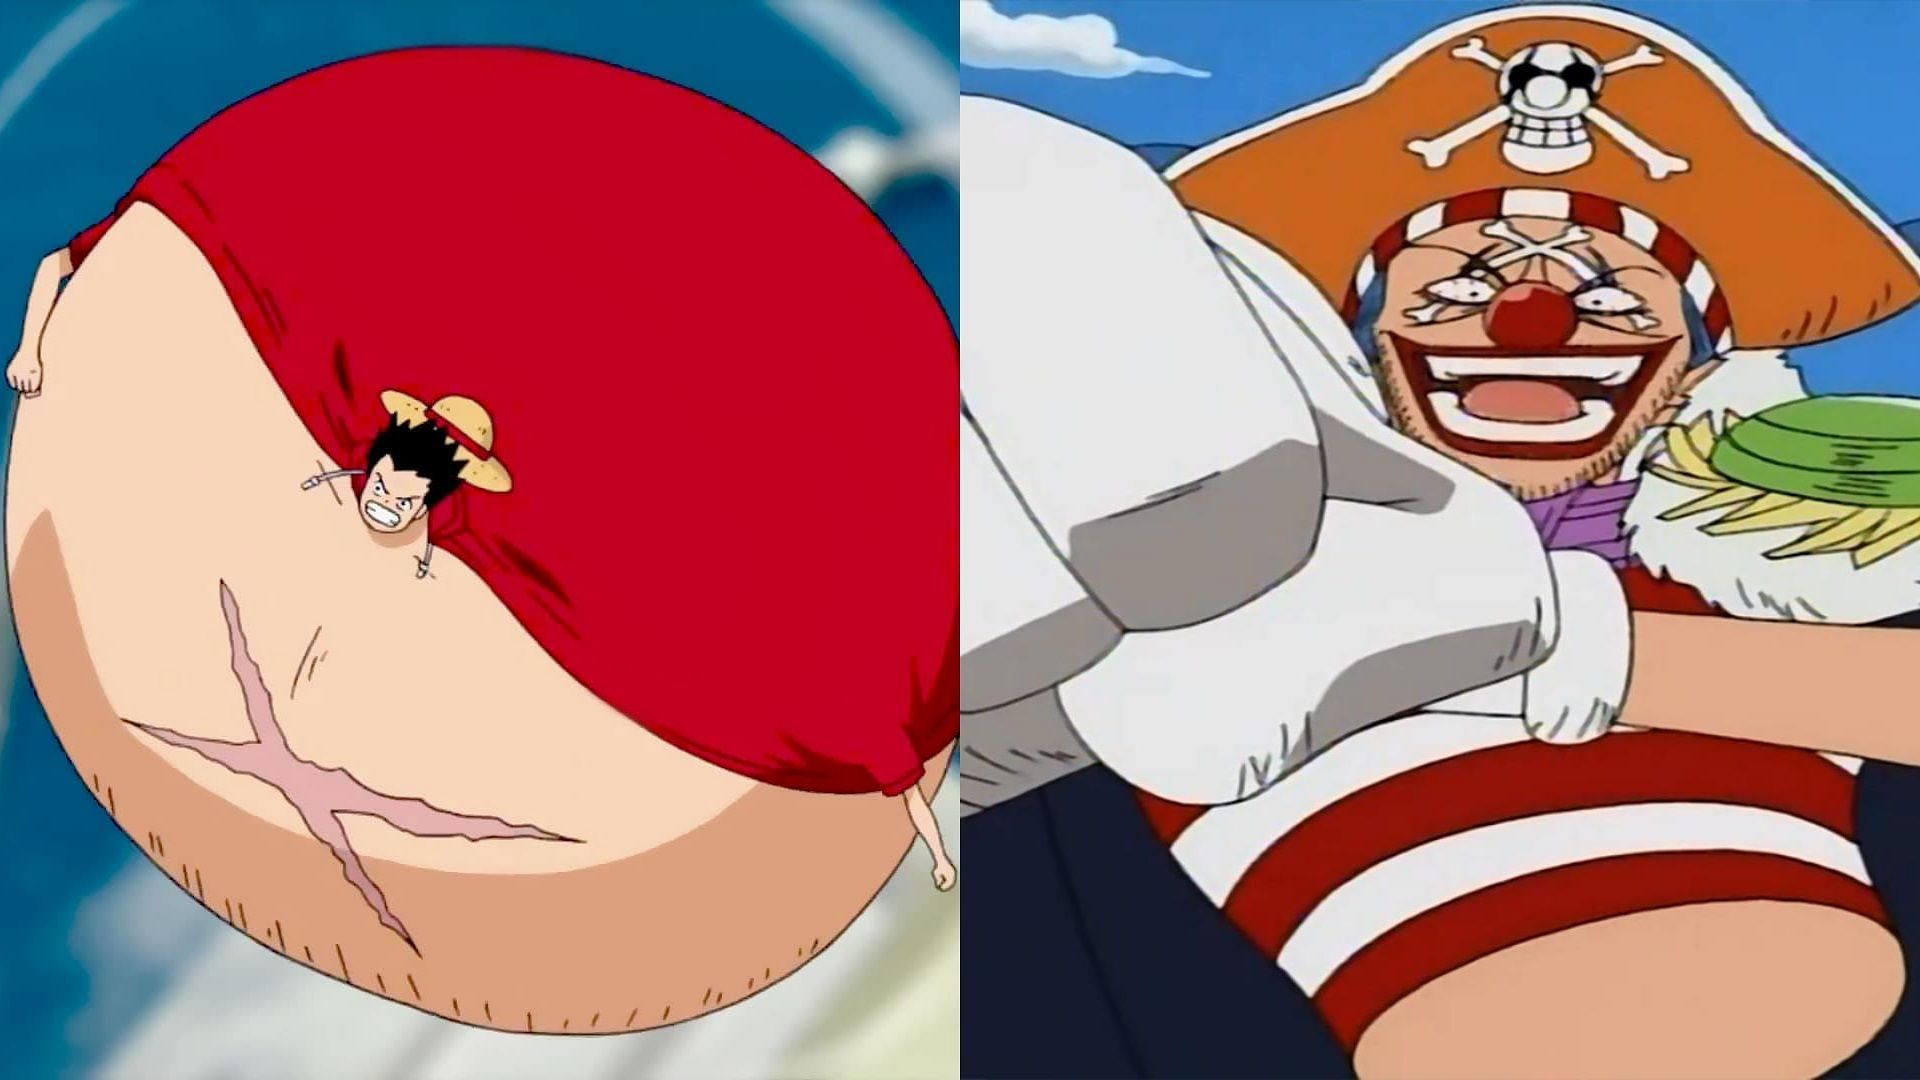 Luffy and Buggy using their Devil Fruits as seen in One Piece (Image via Toei Animation, One Piece)